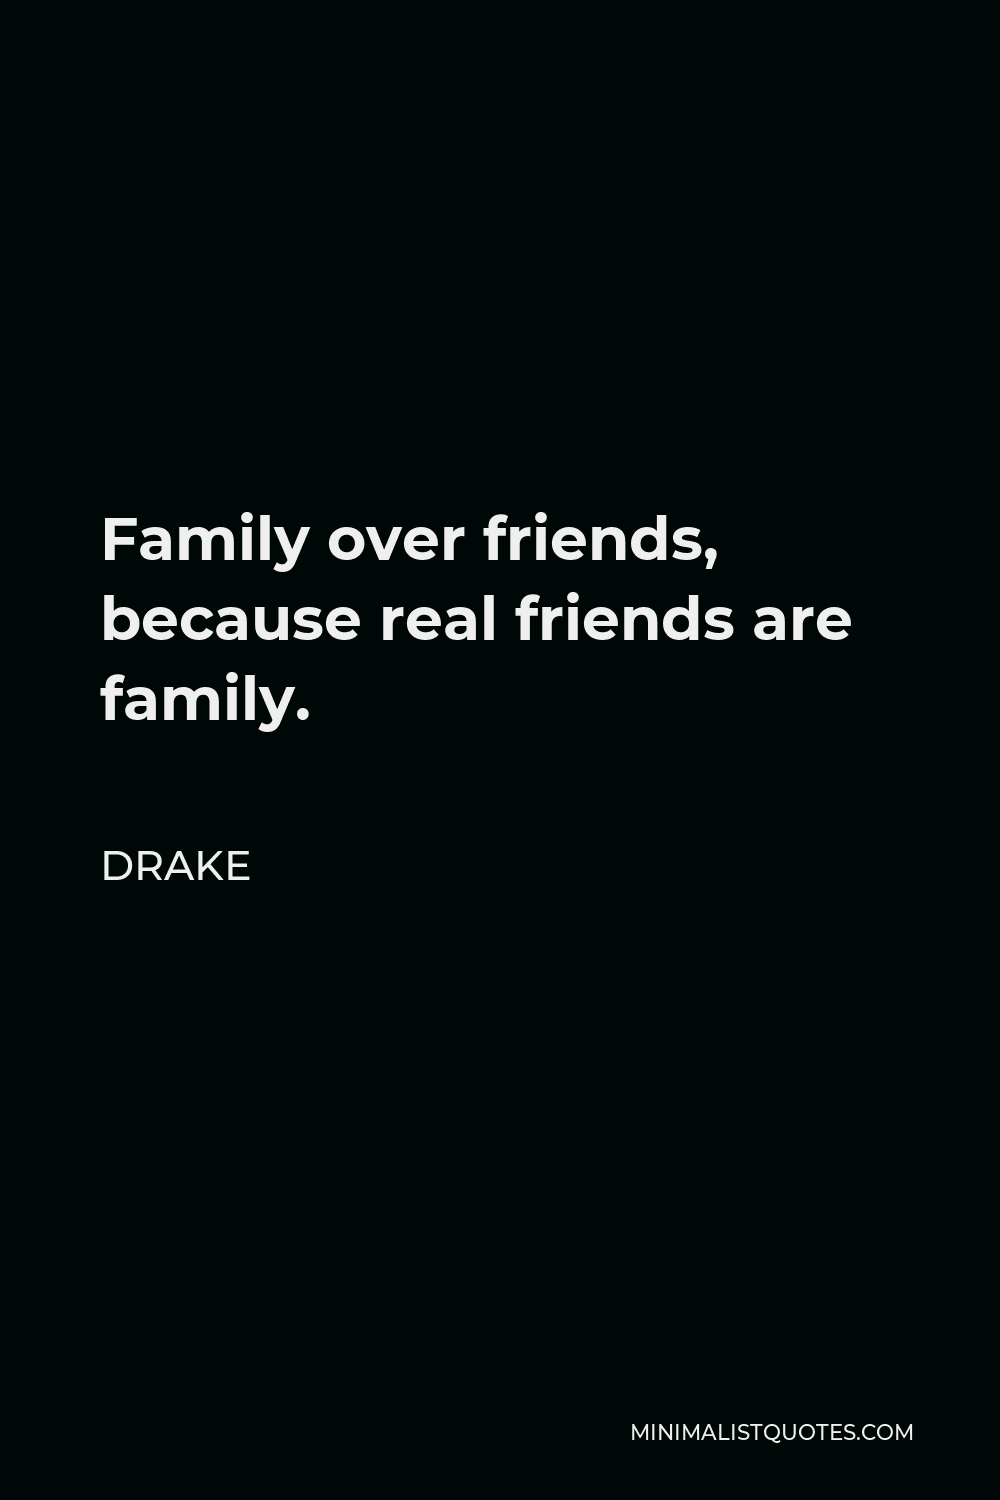 drake quotes about friends